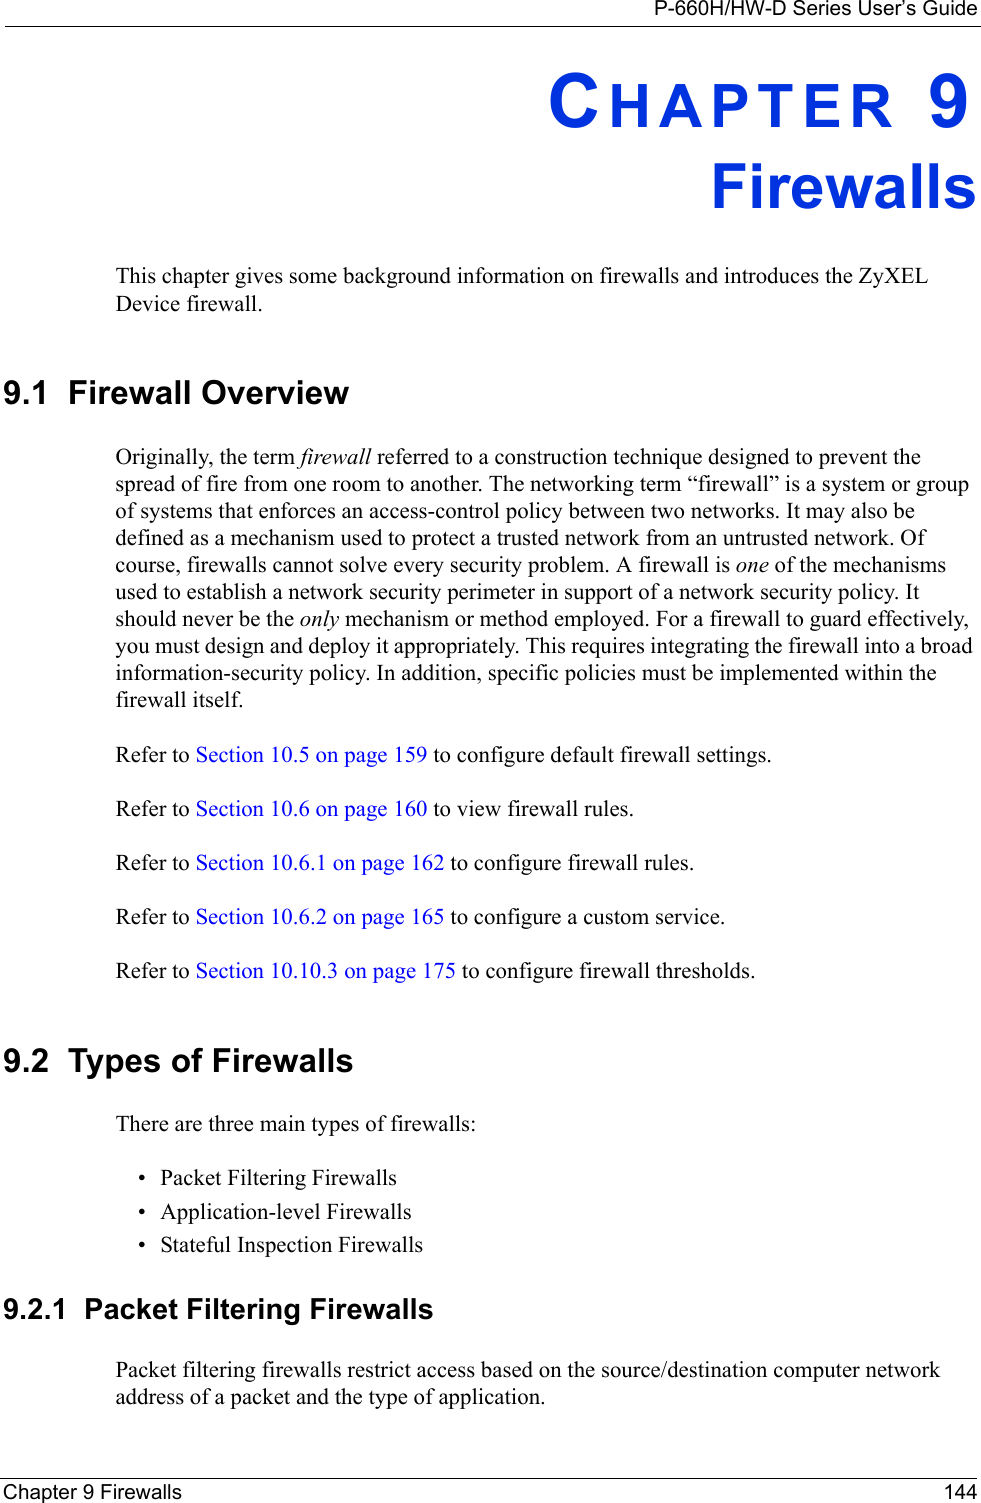 P-660H/HW-D Series User’s GuideChapter 9 Firewalls 144CHAPTER 9FirewallsThis chapter gives some background information on firewalls and introduces the ZyXEL Device firewall.9.1  Firewall Overview Originally, the term firewall referred to a construction technique designed to prevent the spread of fire from one room to another. The networking term “firewall” is a system or group of systems that enforces an access-control policy between two networks. It may also be defined as a mechanism used to protect a trusted network from an untrusted network. Of course, firewalls cannot solve every security problem. A firewall is one of the mechanisms used to establish a network security perimeter in support of a network security policy. It should never be the only mechanism or method employed. For a firewall to guard effectively, you must design and deploy it appropriately. This requires integrating the firewall into a broad information-security policy. In addition, specific policies must be implemented within the firewall itself. Refer to Section 10.5 on page 159 to configure default firewall settings. Refer to Section 10.6 on page 160 to view firewall rules. Refer to Section 10.6.1 on page 162 to configure firewall rules. Refer to Section 10.6.2 on page 165 to configure a custom service. Refer to Section 10.10.3 on page 175 to configure firewall thresholds. 9.2  Types of FirewallsThere are three main types of firewalls:• Packet Filtering Firewalls• Application-level Firewalls• Stateful Inspection Firewalls9.2.1  Packet Filtering FirewallsPacket filtering firewalls restrict access based on the source/destination computer network address of a packet and the type of application. 